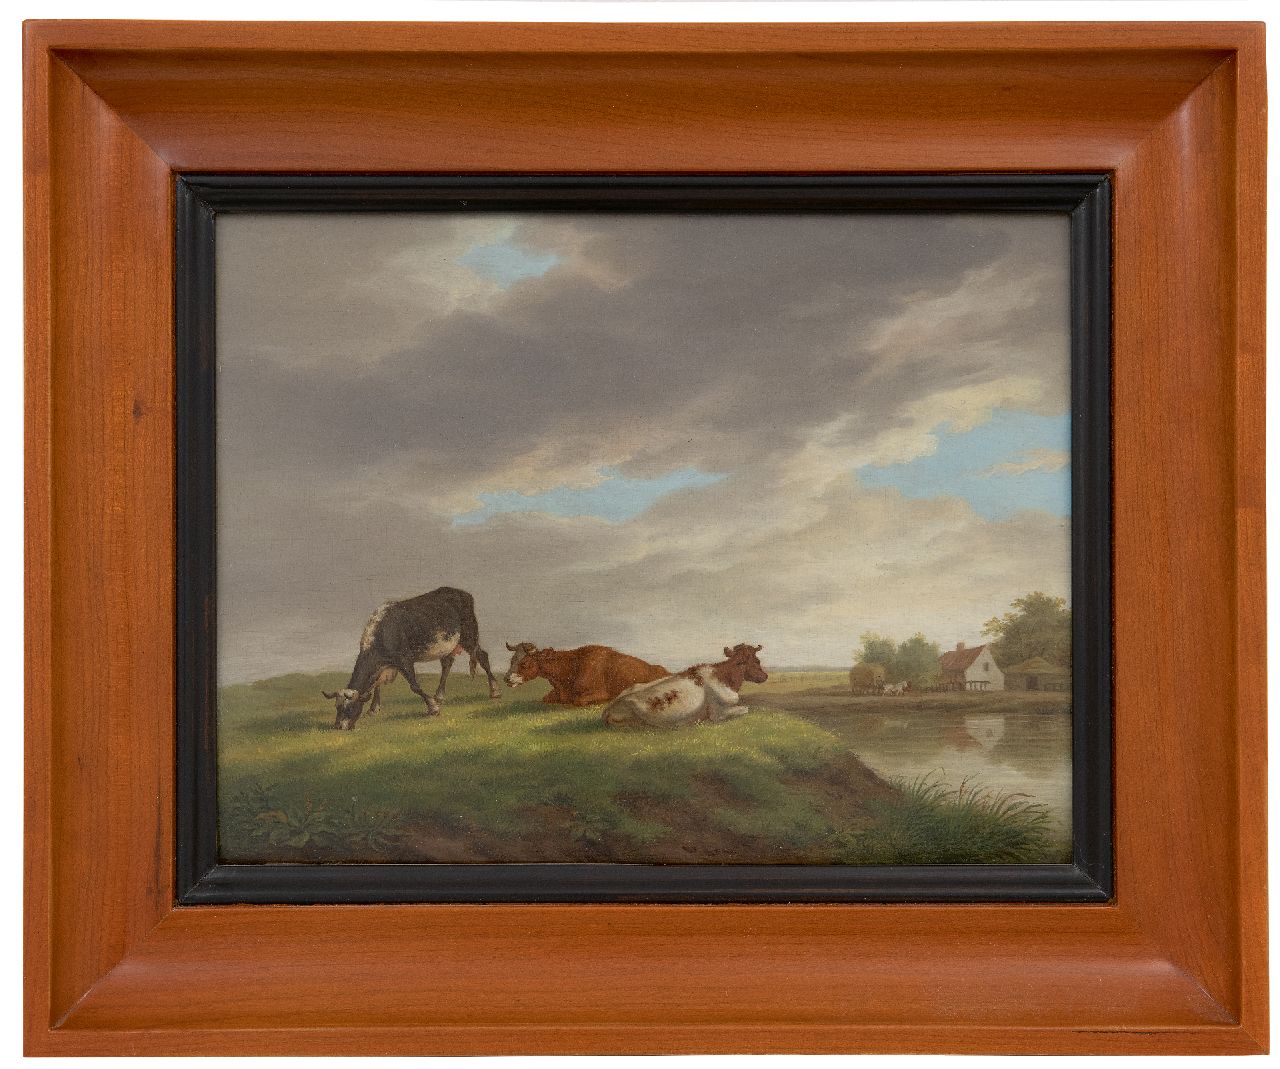 Burgh H.A. van der | Hendrik Adam van der Burgh | Paintings offered for sale | Cows in a landscape with a farm, oil on panel 20.4 x 26.3 cm, signed l.l. and dated 1821